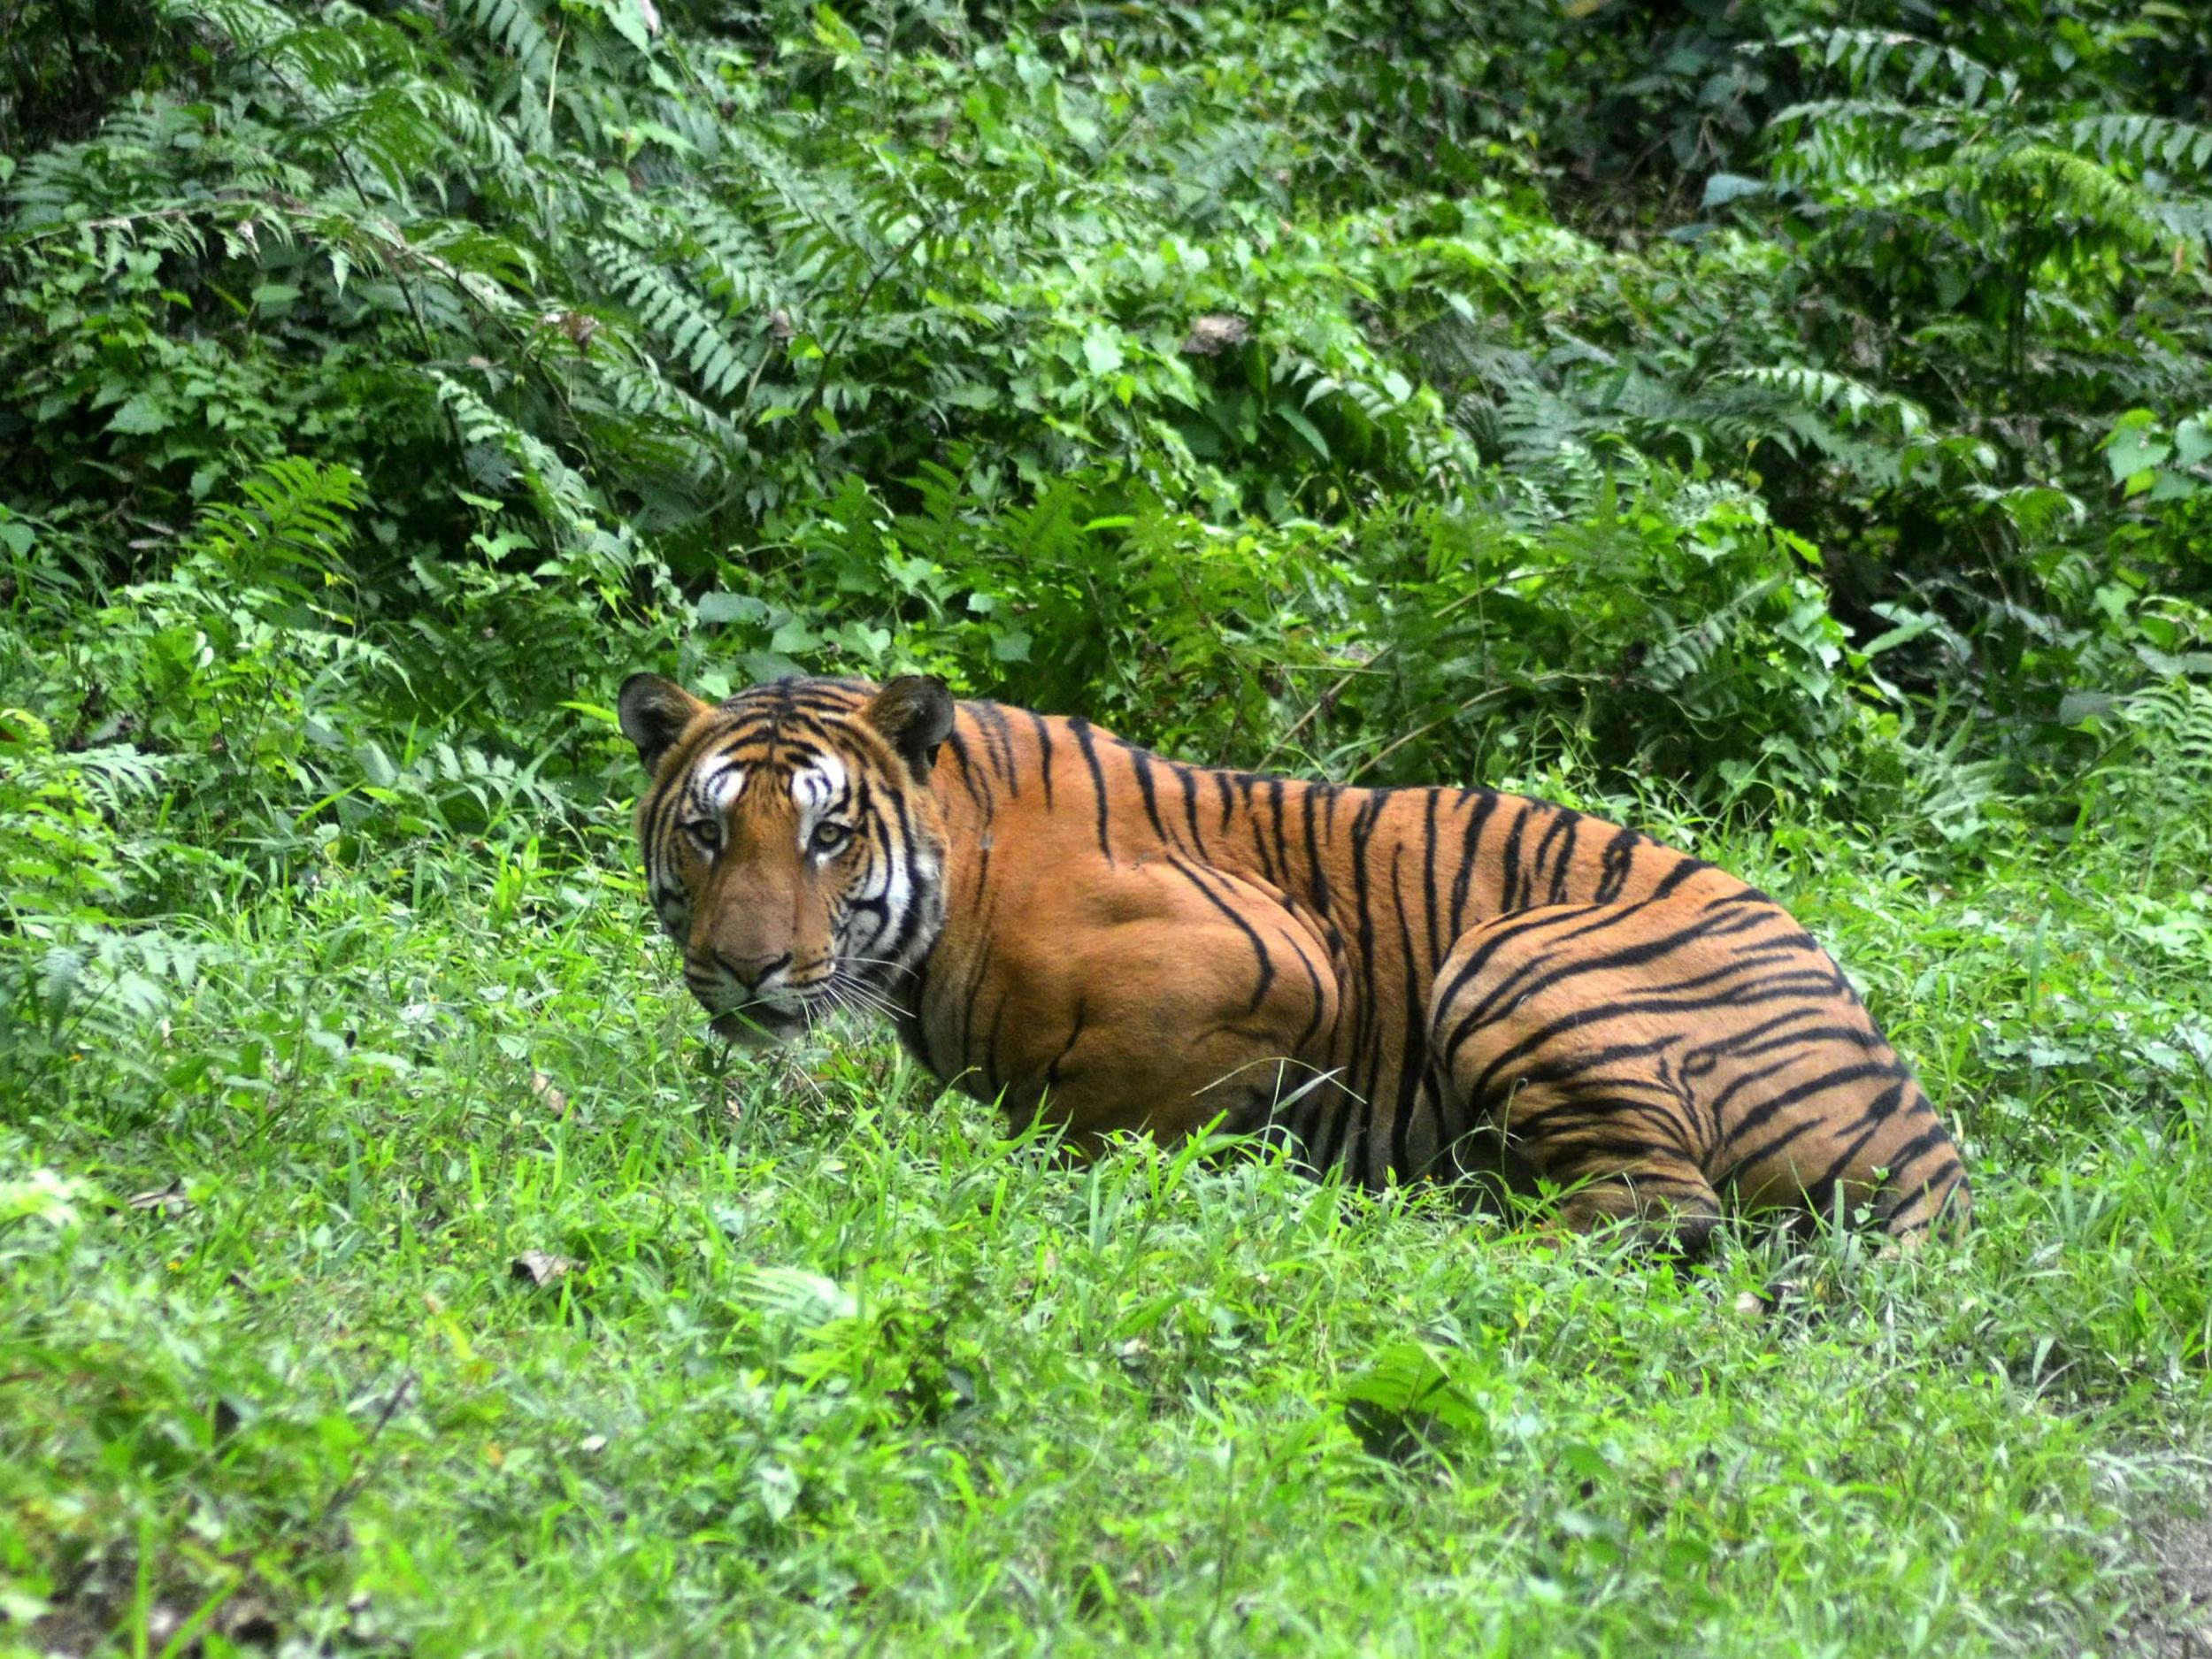 The number of tigers in the wild has risen for the first time in 100 years